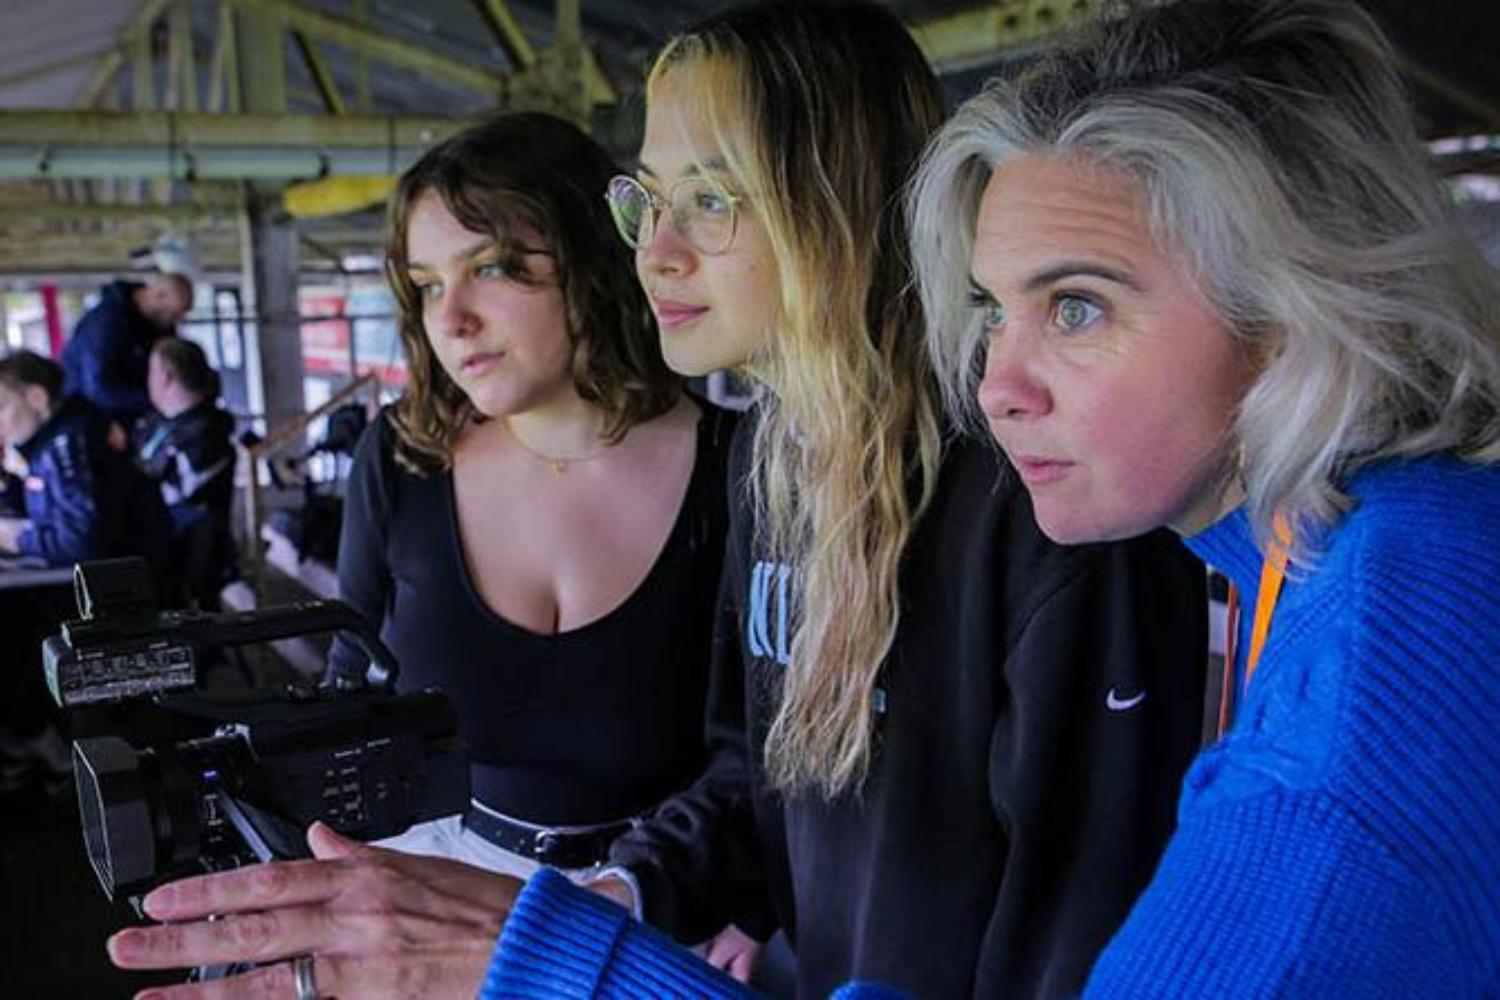 A group of women filming in a sports stadium